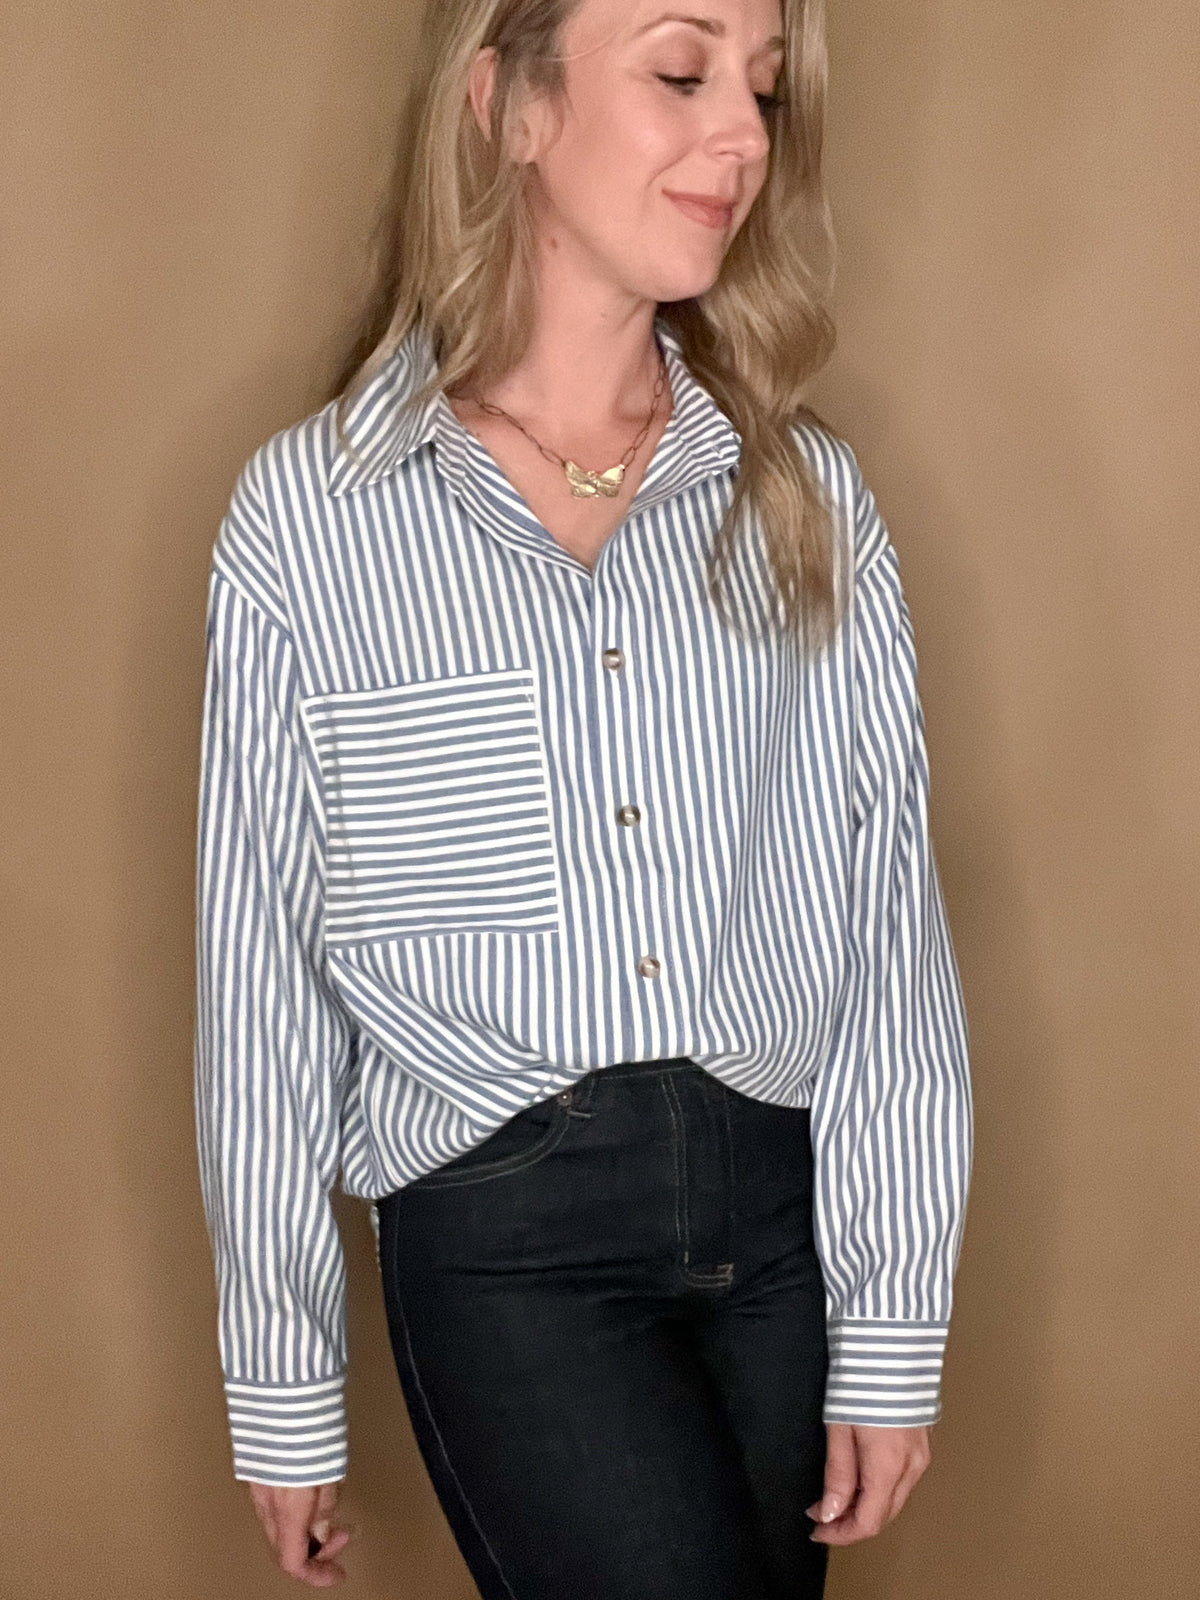 This Classic Stripe Shirt is perfect for the modern sophisticate. Crafted from a luxurious cotton-poly blend, it is soft and stylish while also resistant to wrinkles and maintaining its shape. The classic blue vertical striped design is complemented with a statement front pocket featuring horizontal stripes for an eye-catching finish.